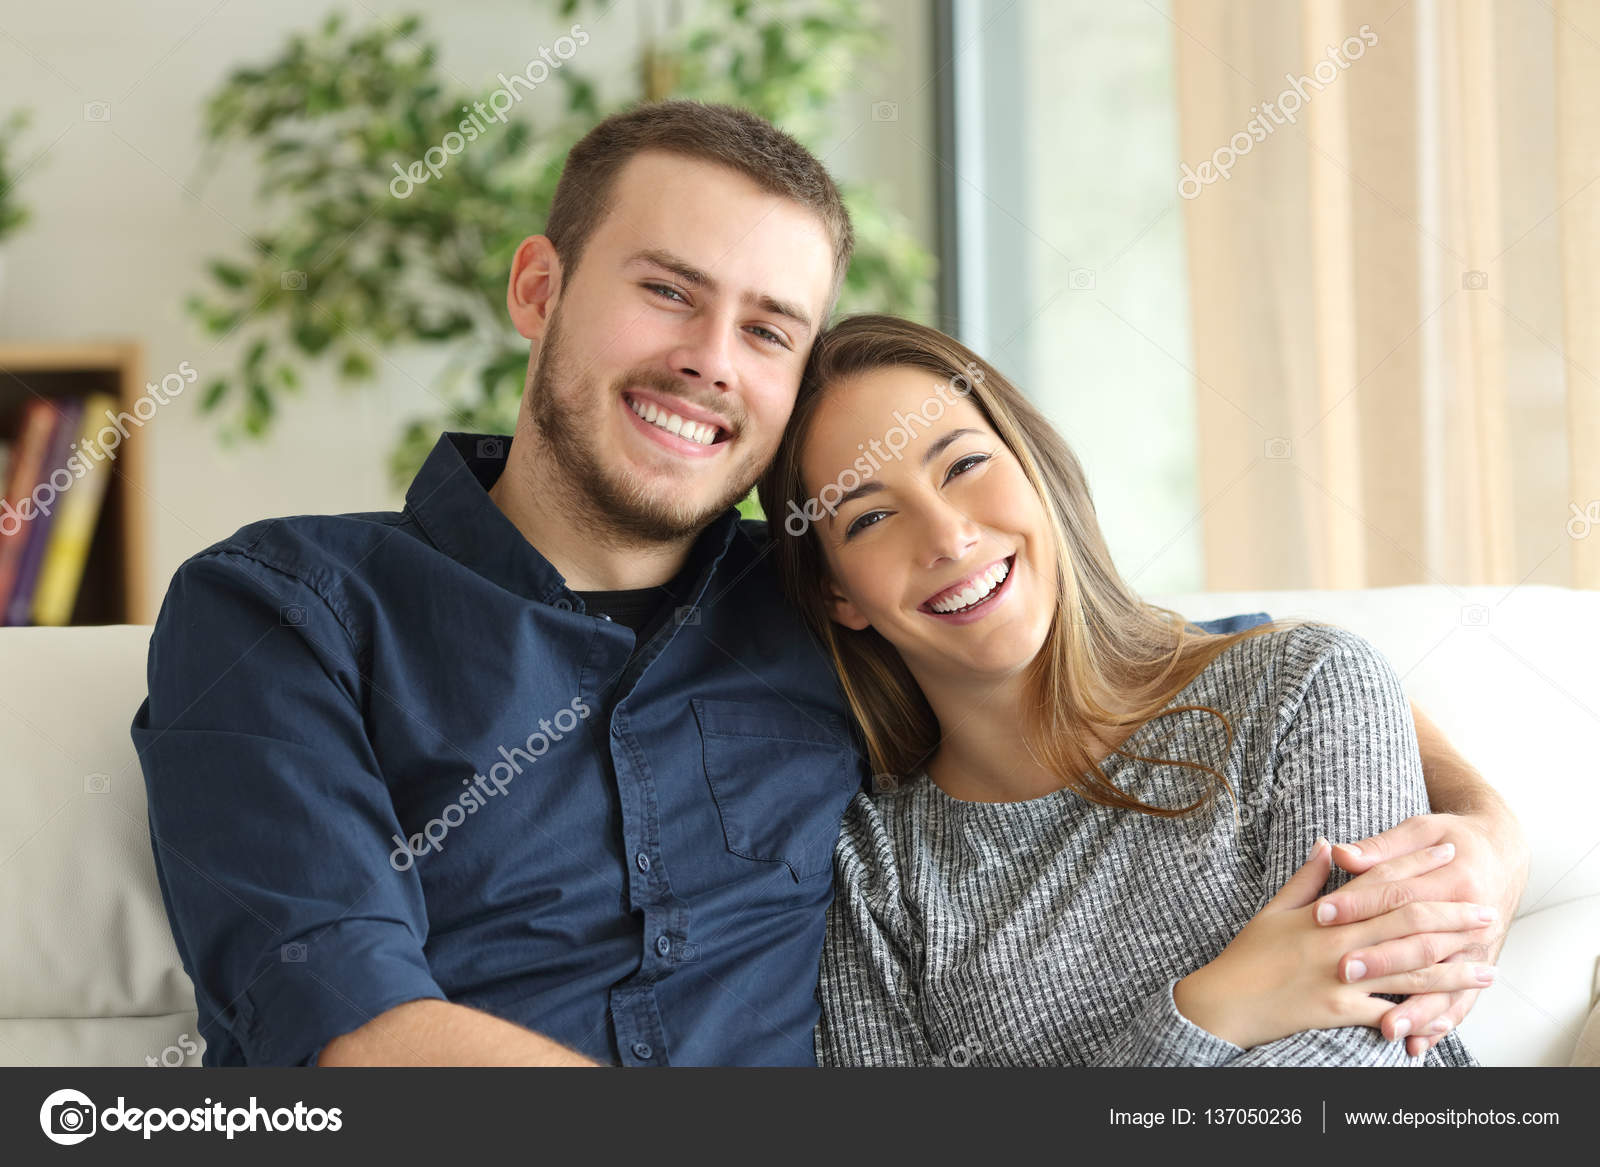 Premium Photo | Portrait of happy beautiful young couple posing at kitchen